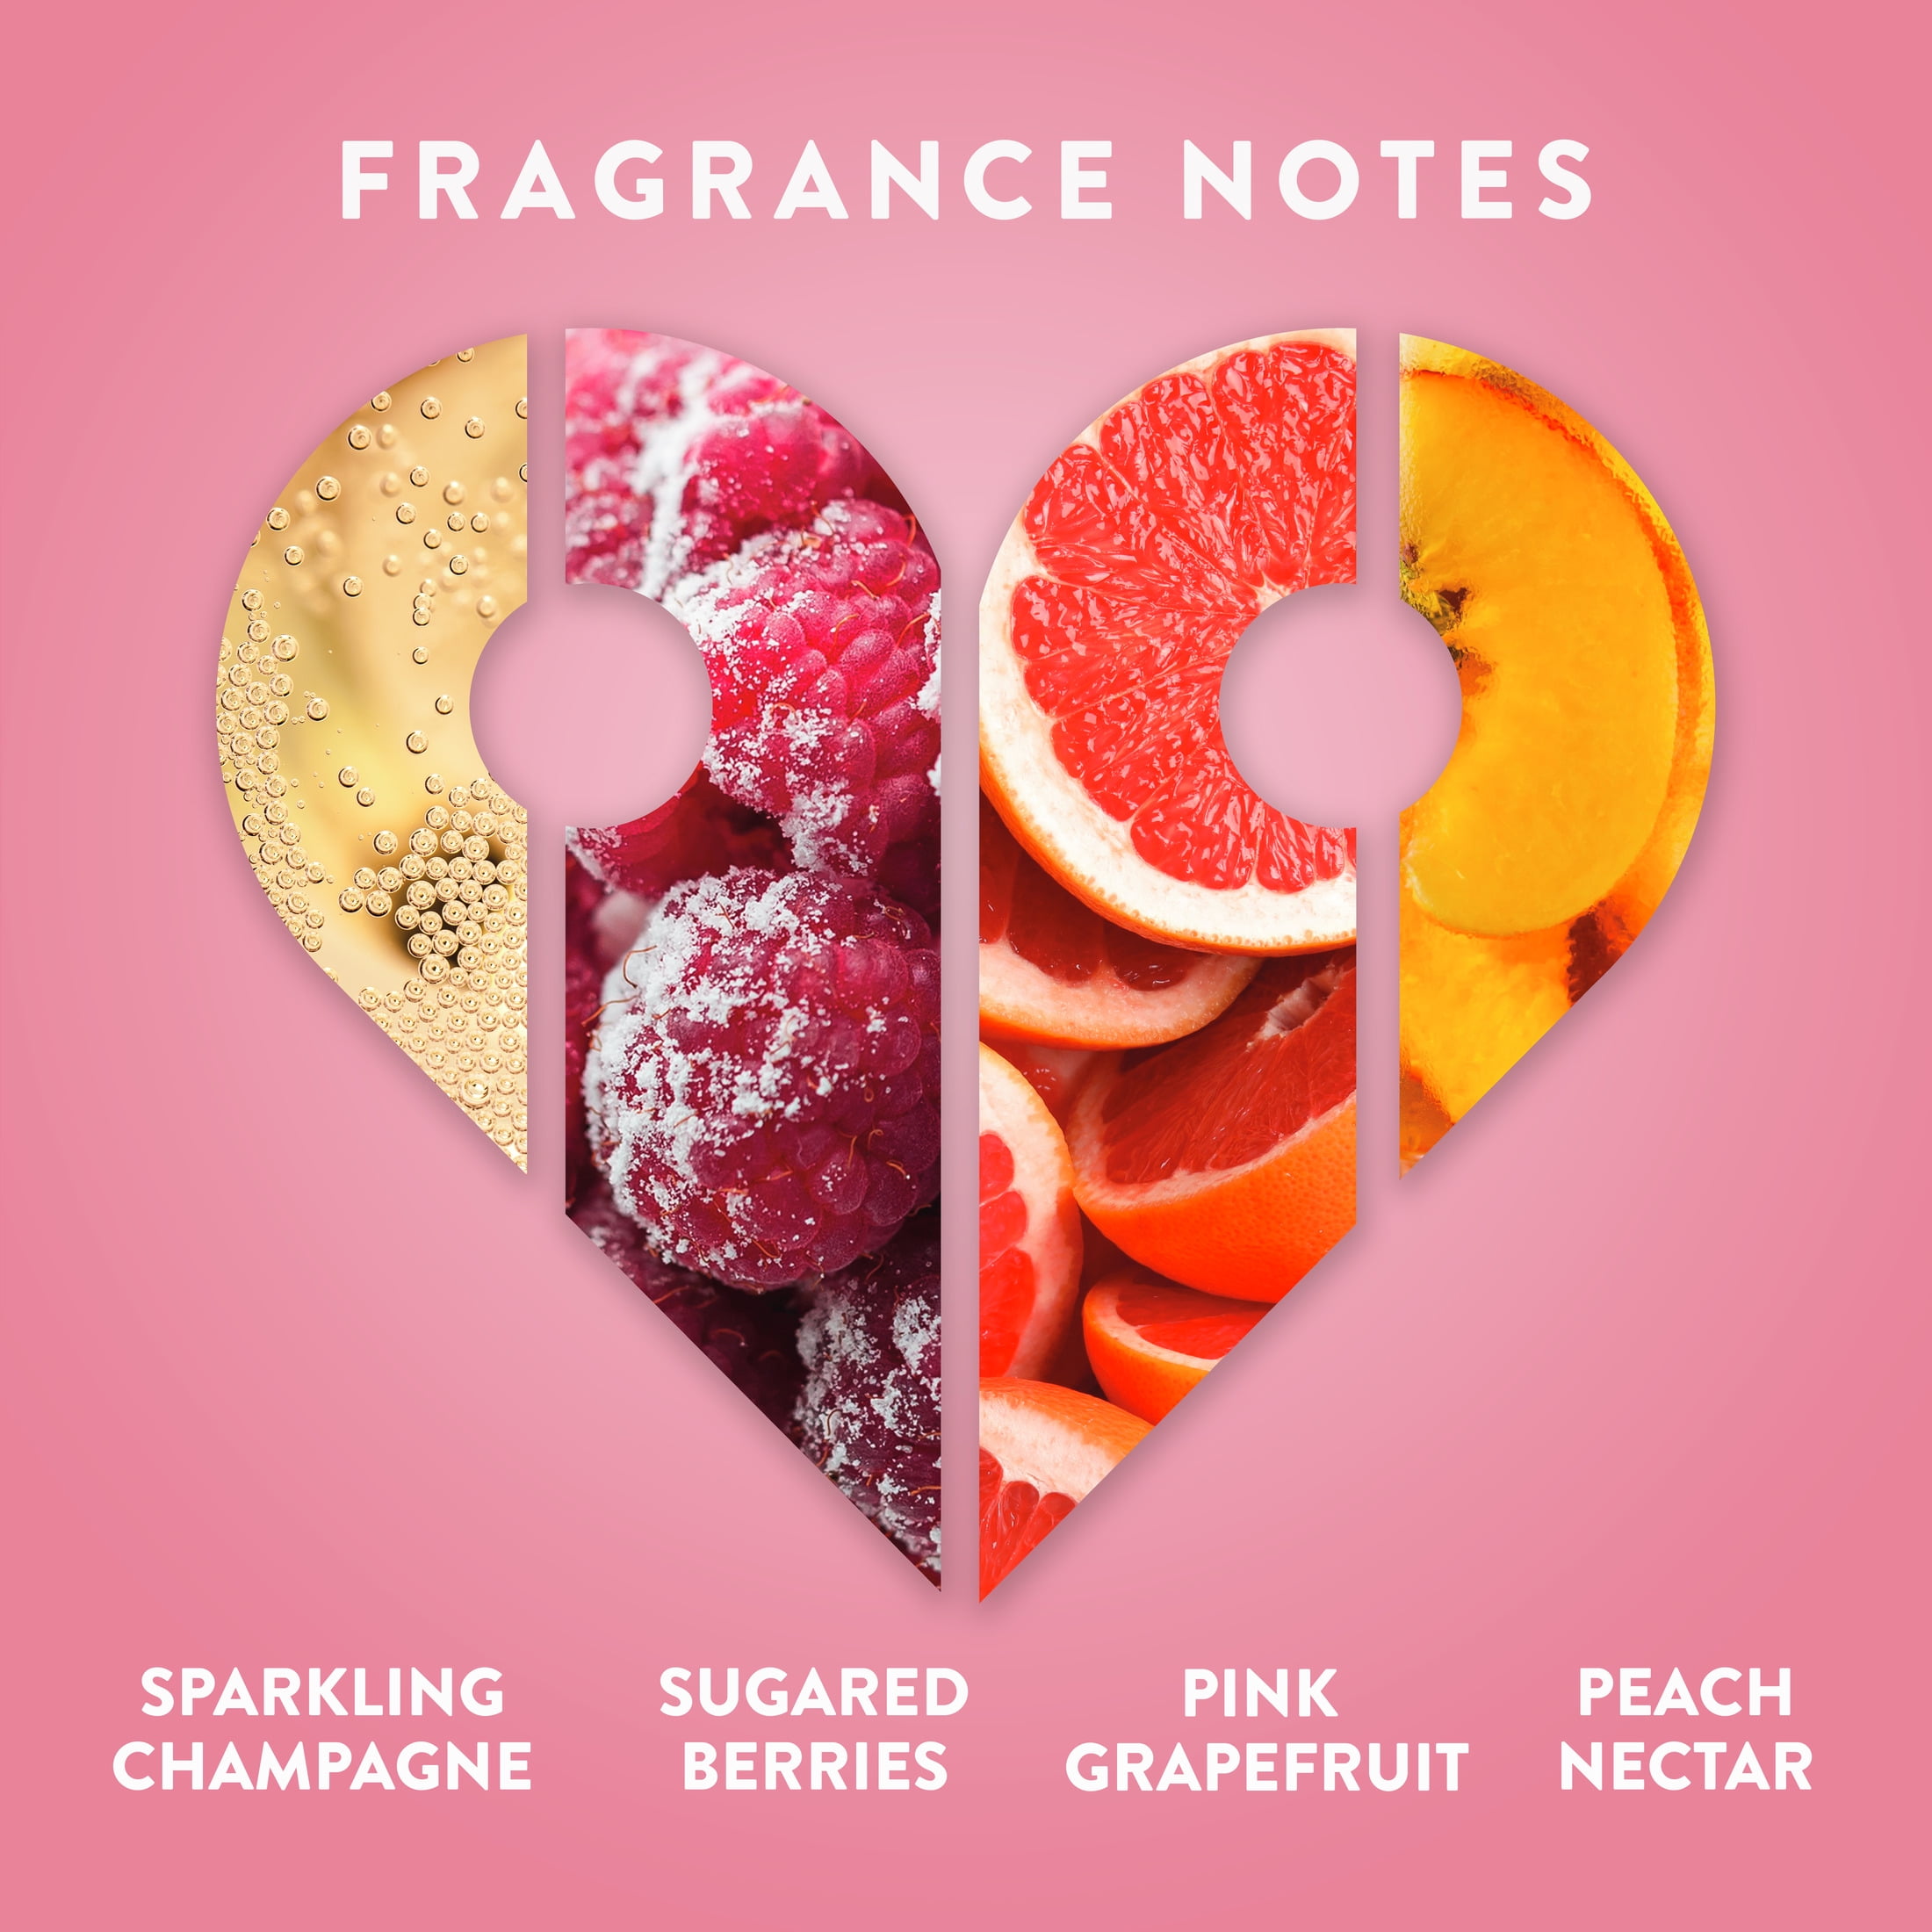 Find Your Happy Place Body Scrub Strawberries in Champagne 10